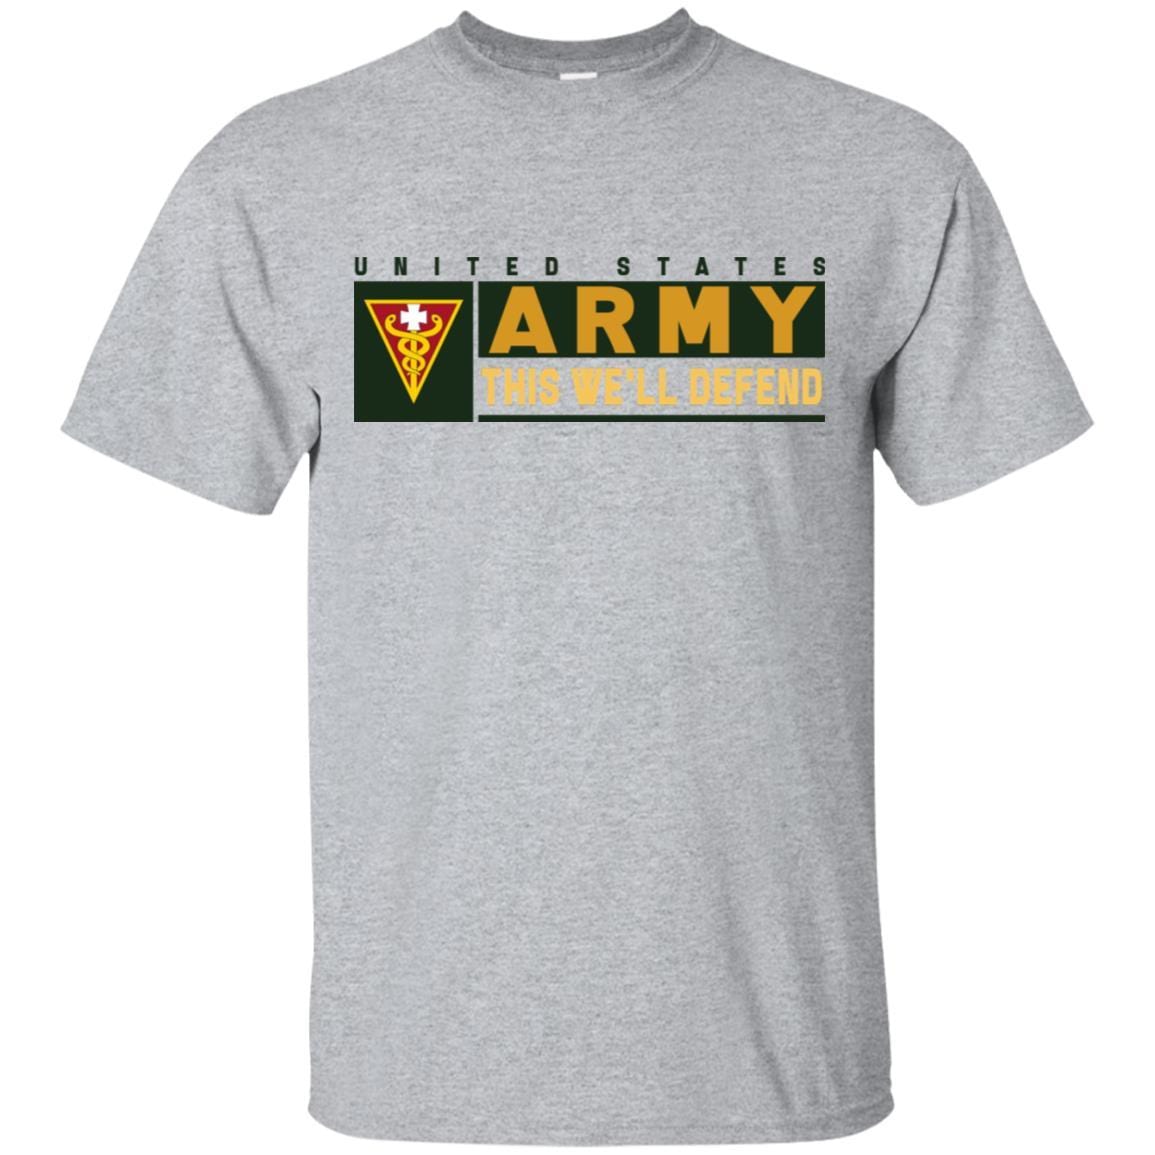 US Army 3RD MEDICAL COMMAND- This We'll Defend T-Shirt On Front For Men-TShirt-Army-Veterans Nation